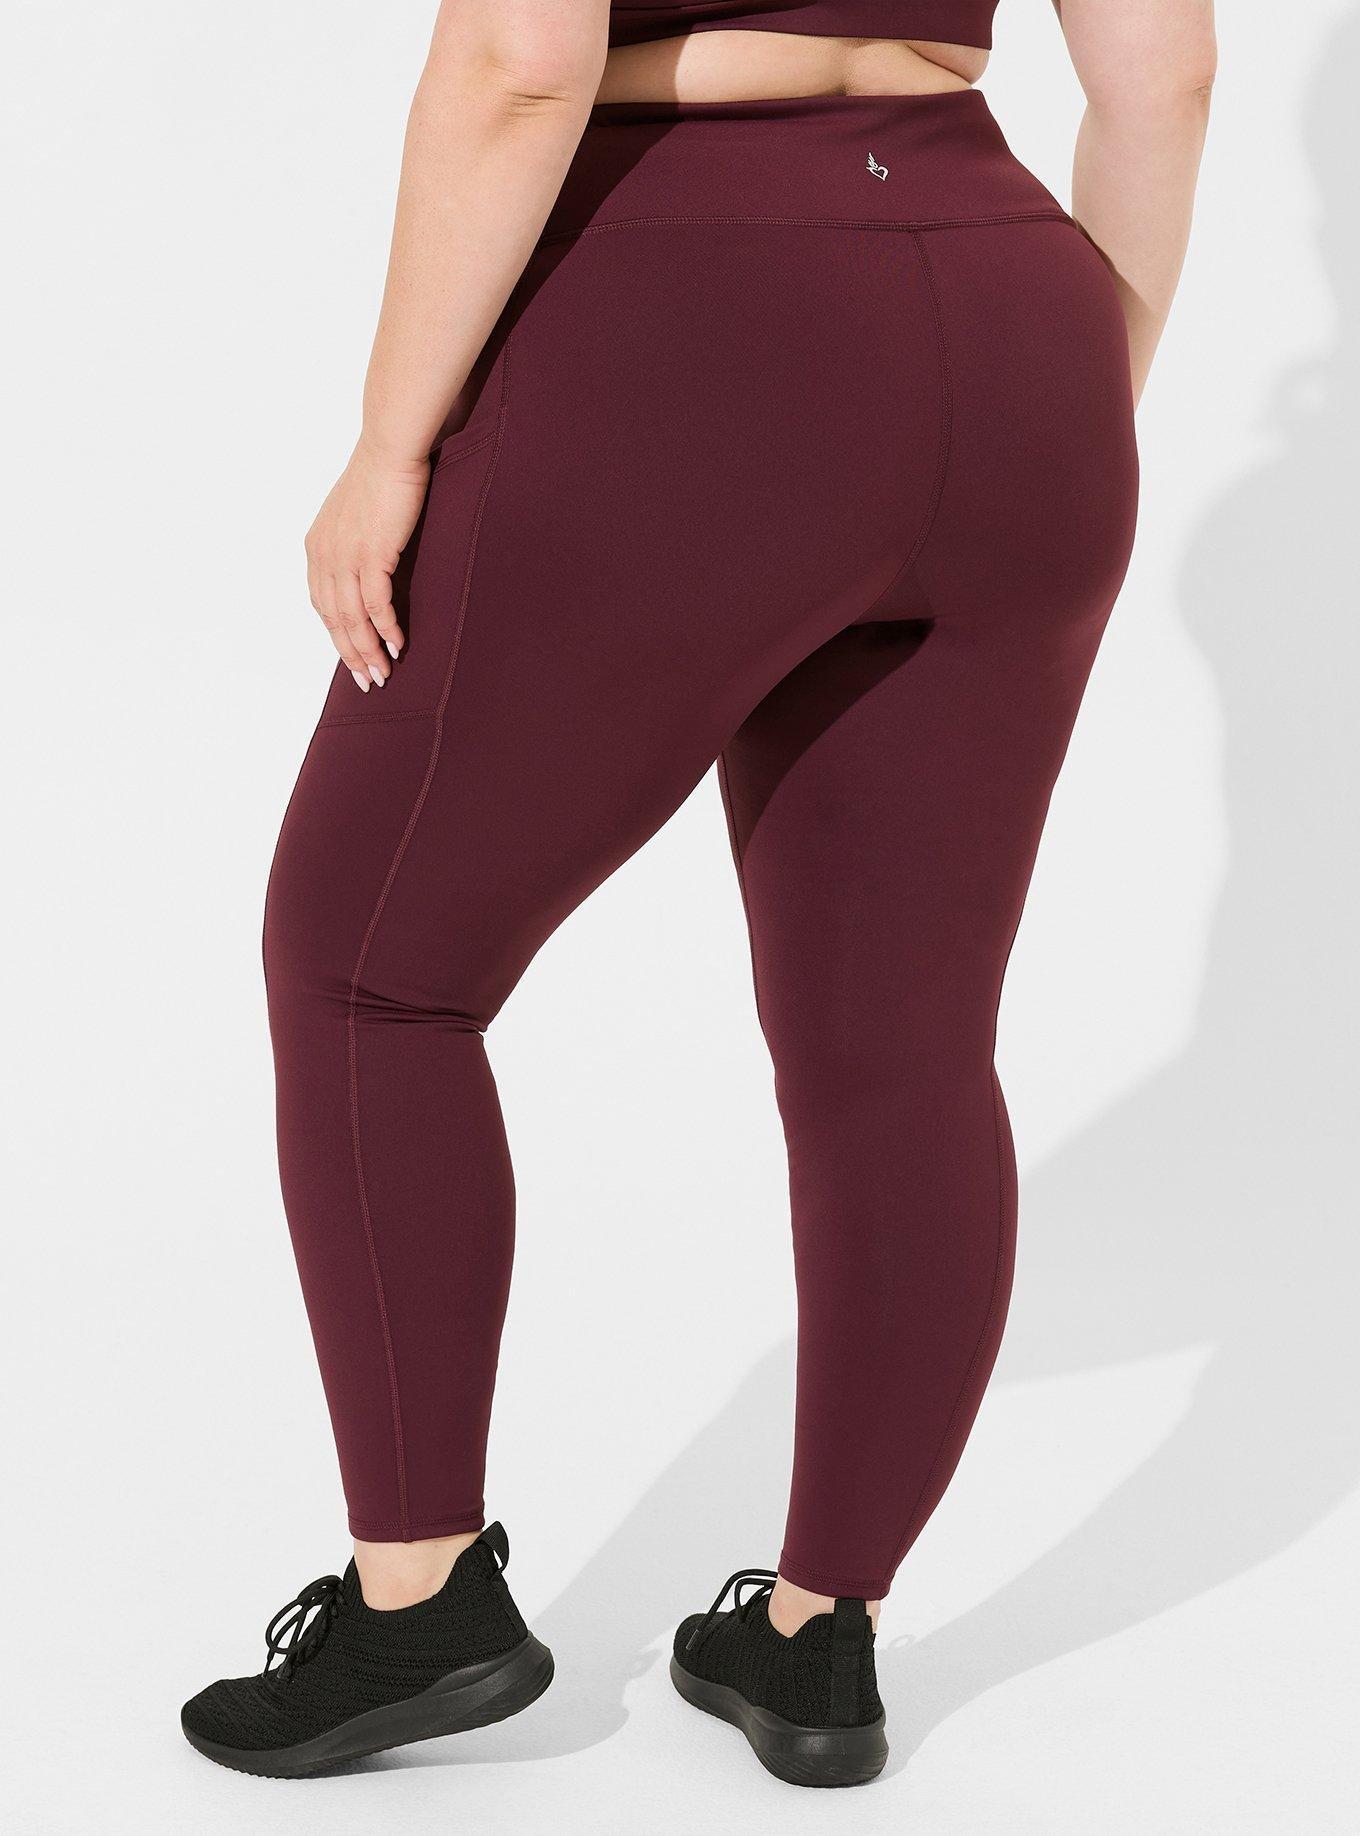 Plus Size - Performance Core Full Length Active Legging With Side Pockets -  Torrid